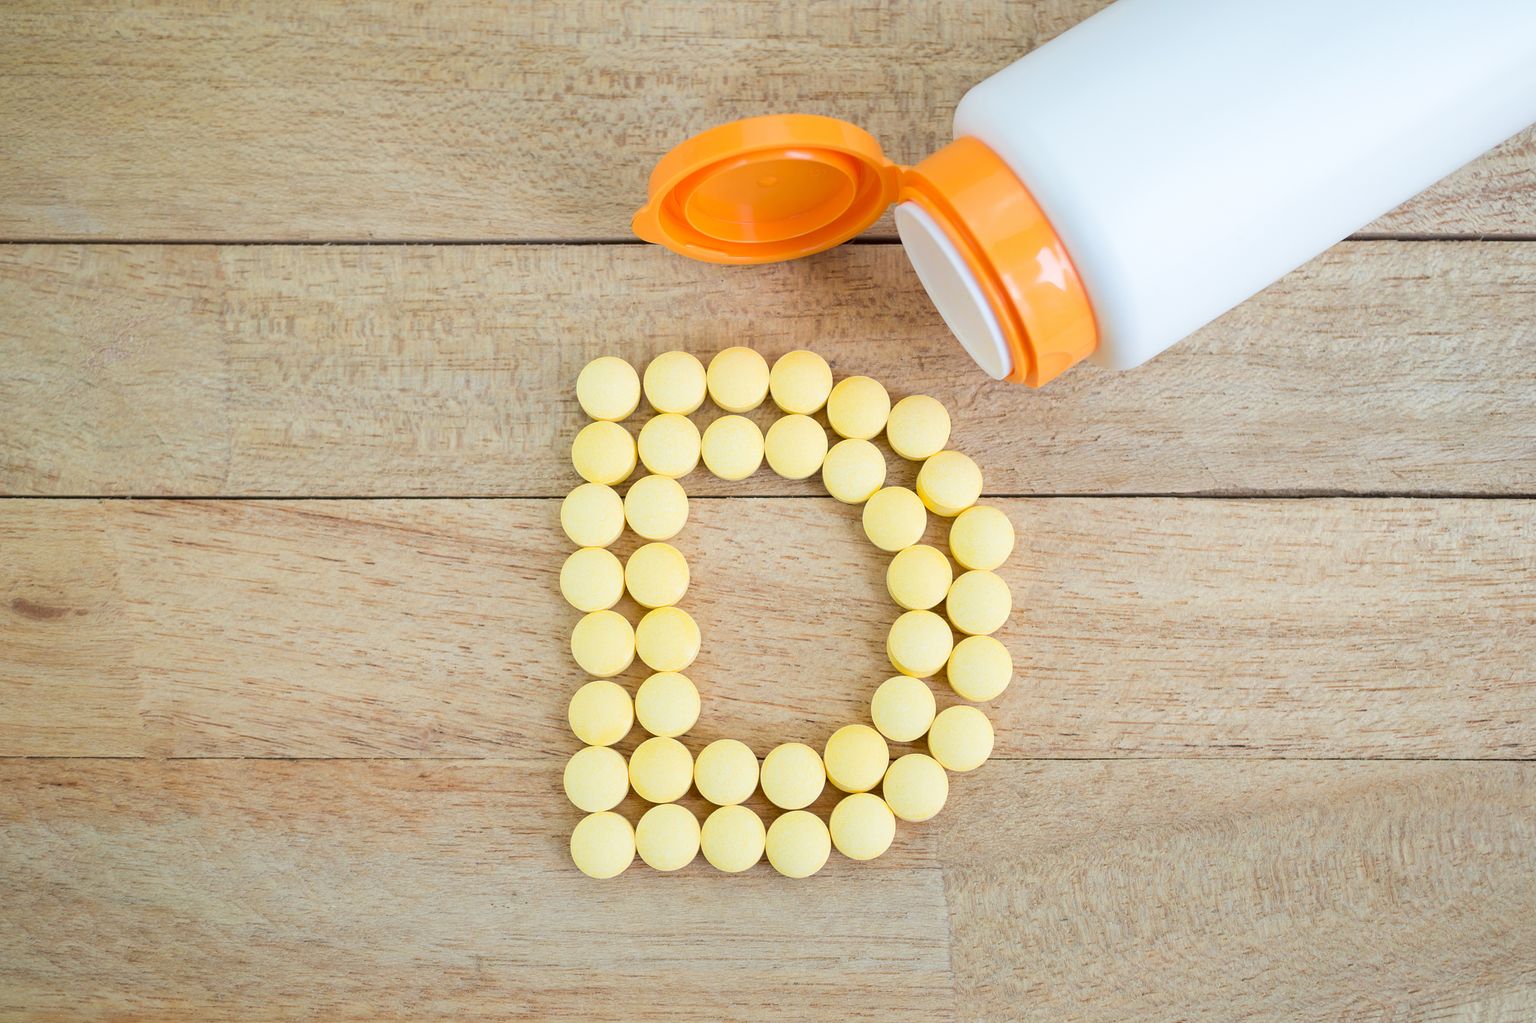 Yellow tablets are placed together to form the shape of the letter D on a wooden background.